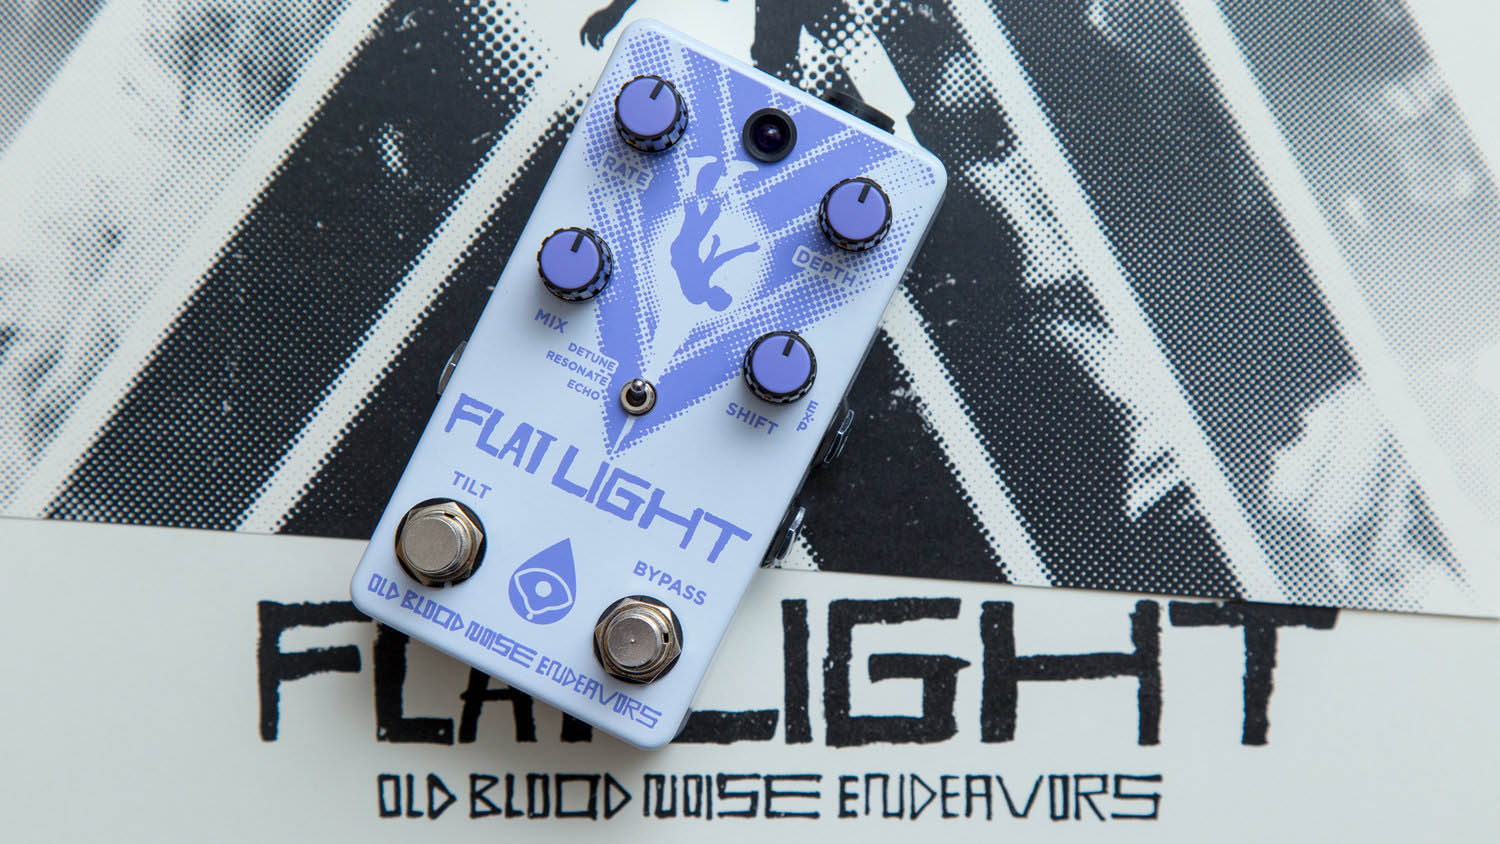 Old Blood Noise Endeavors' Flat is the most exciting flanger we've heard ages | MusicRadar